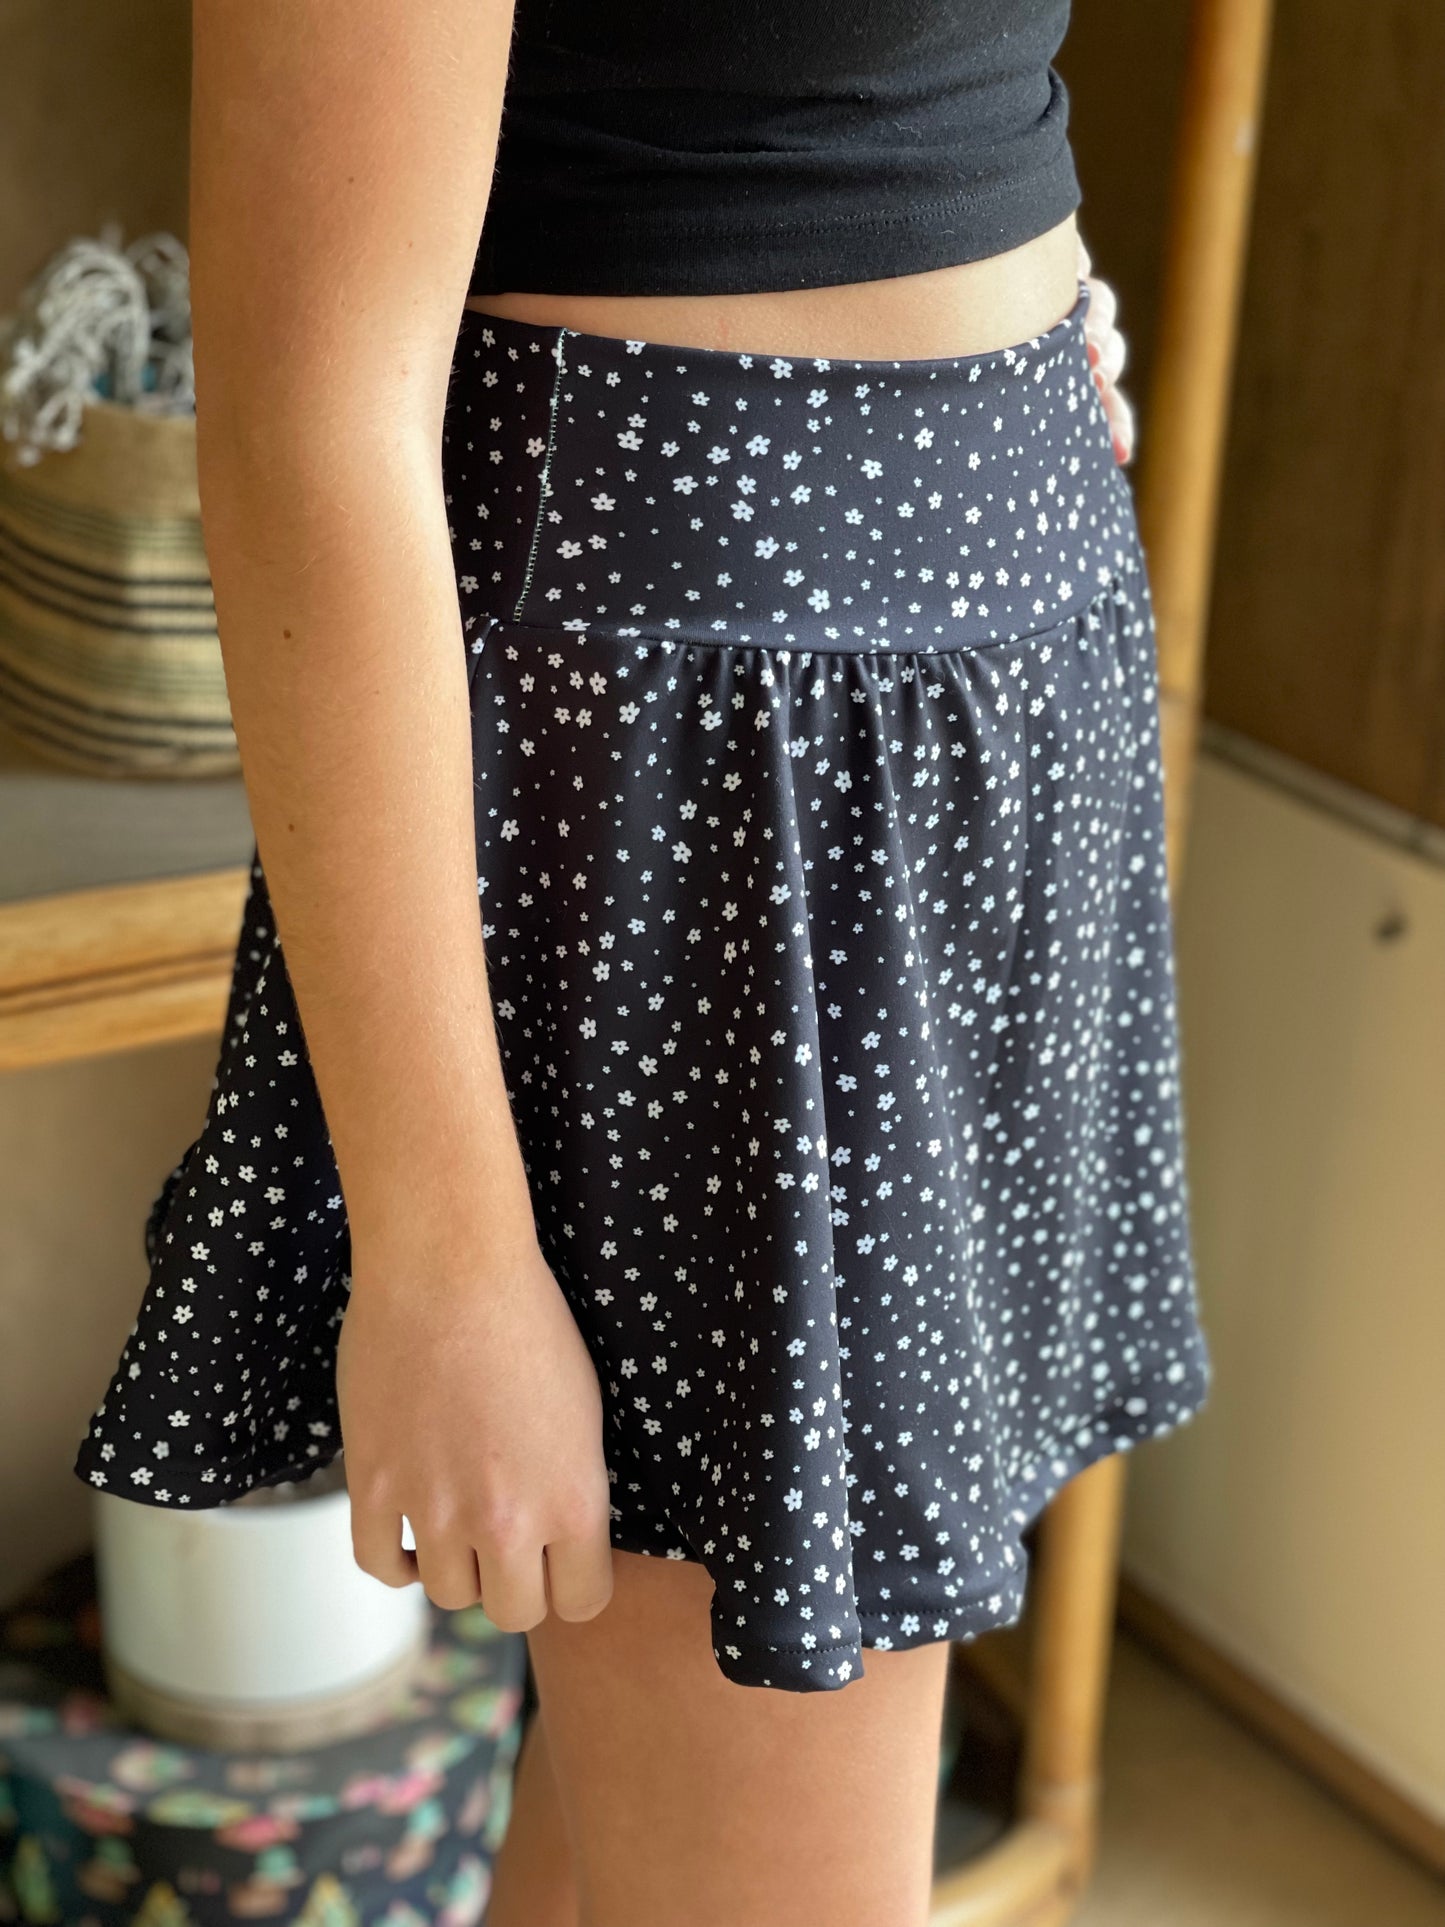 Adult Sporty Skorty Skirt, Shorts to full length yoga pants - Digital PDF Sewing Pattern - 28" hip to 83" hip